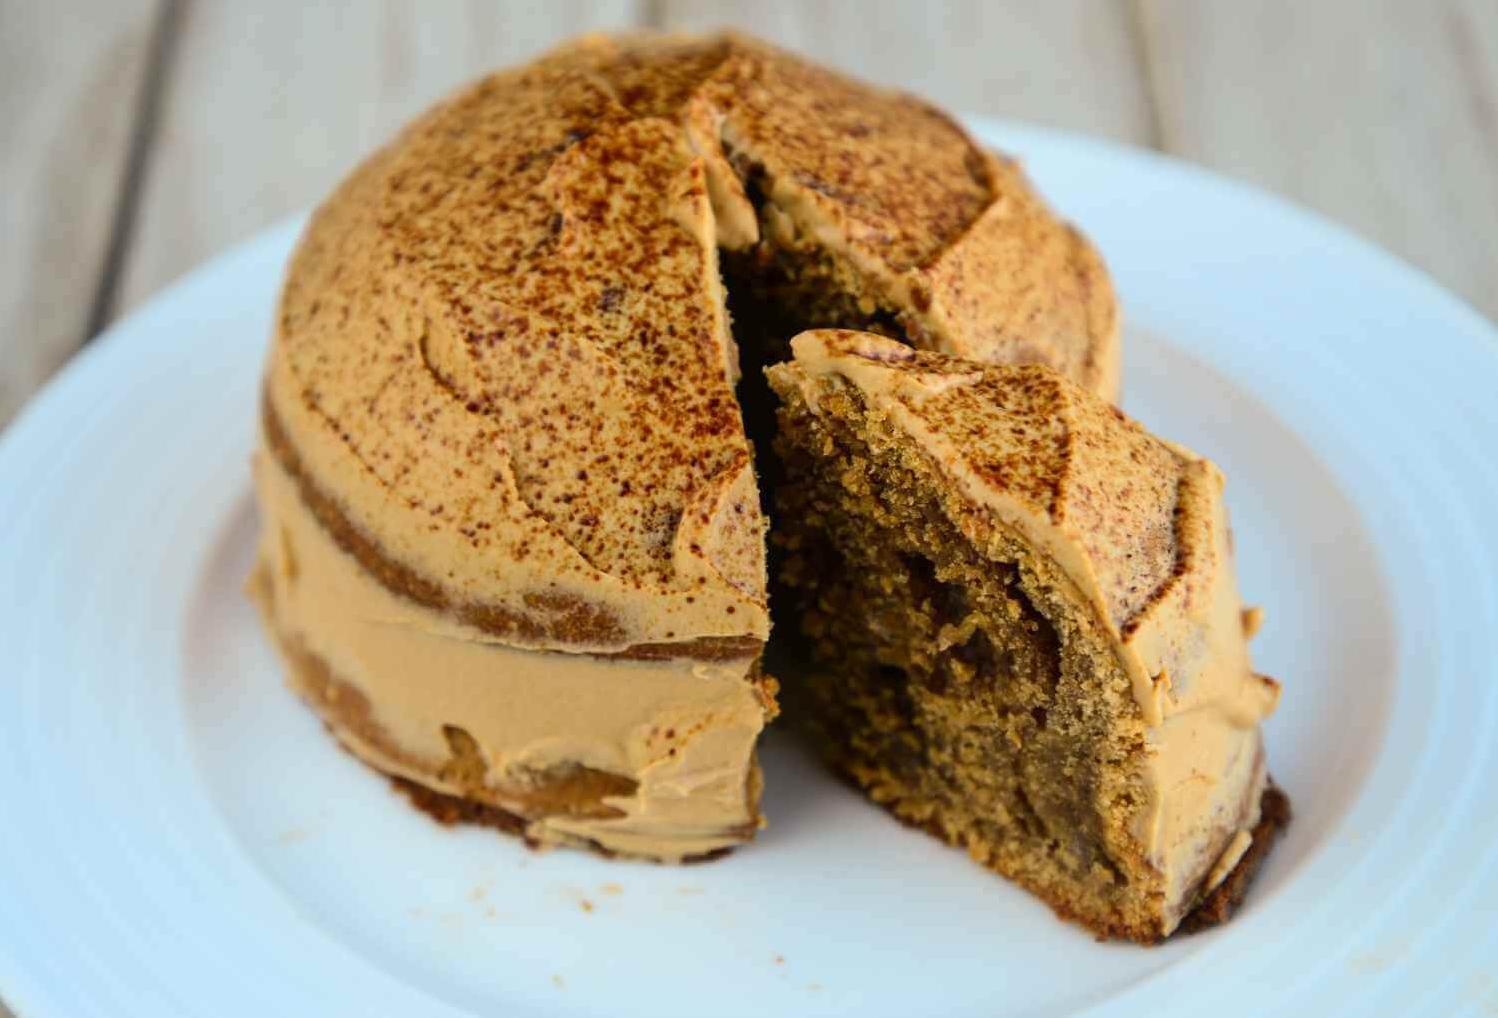  Why settle for a plain cup of coffee when you can enjoy it with a slice of this amazing cake?